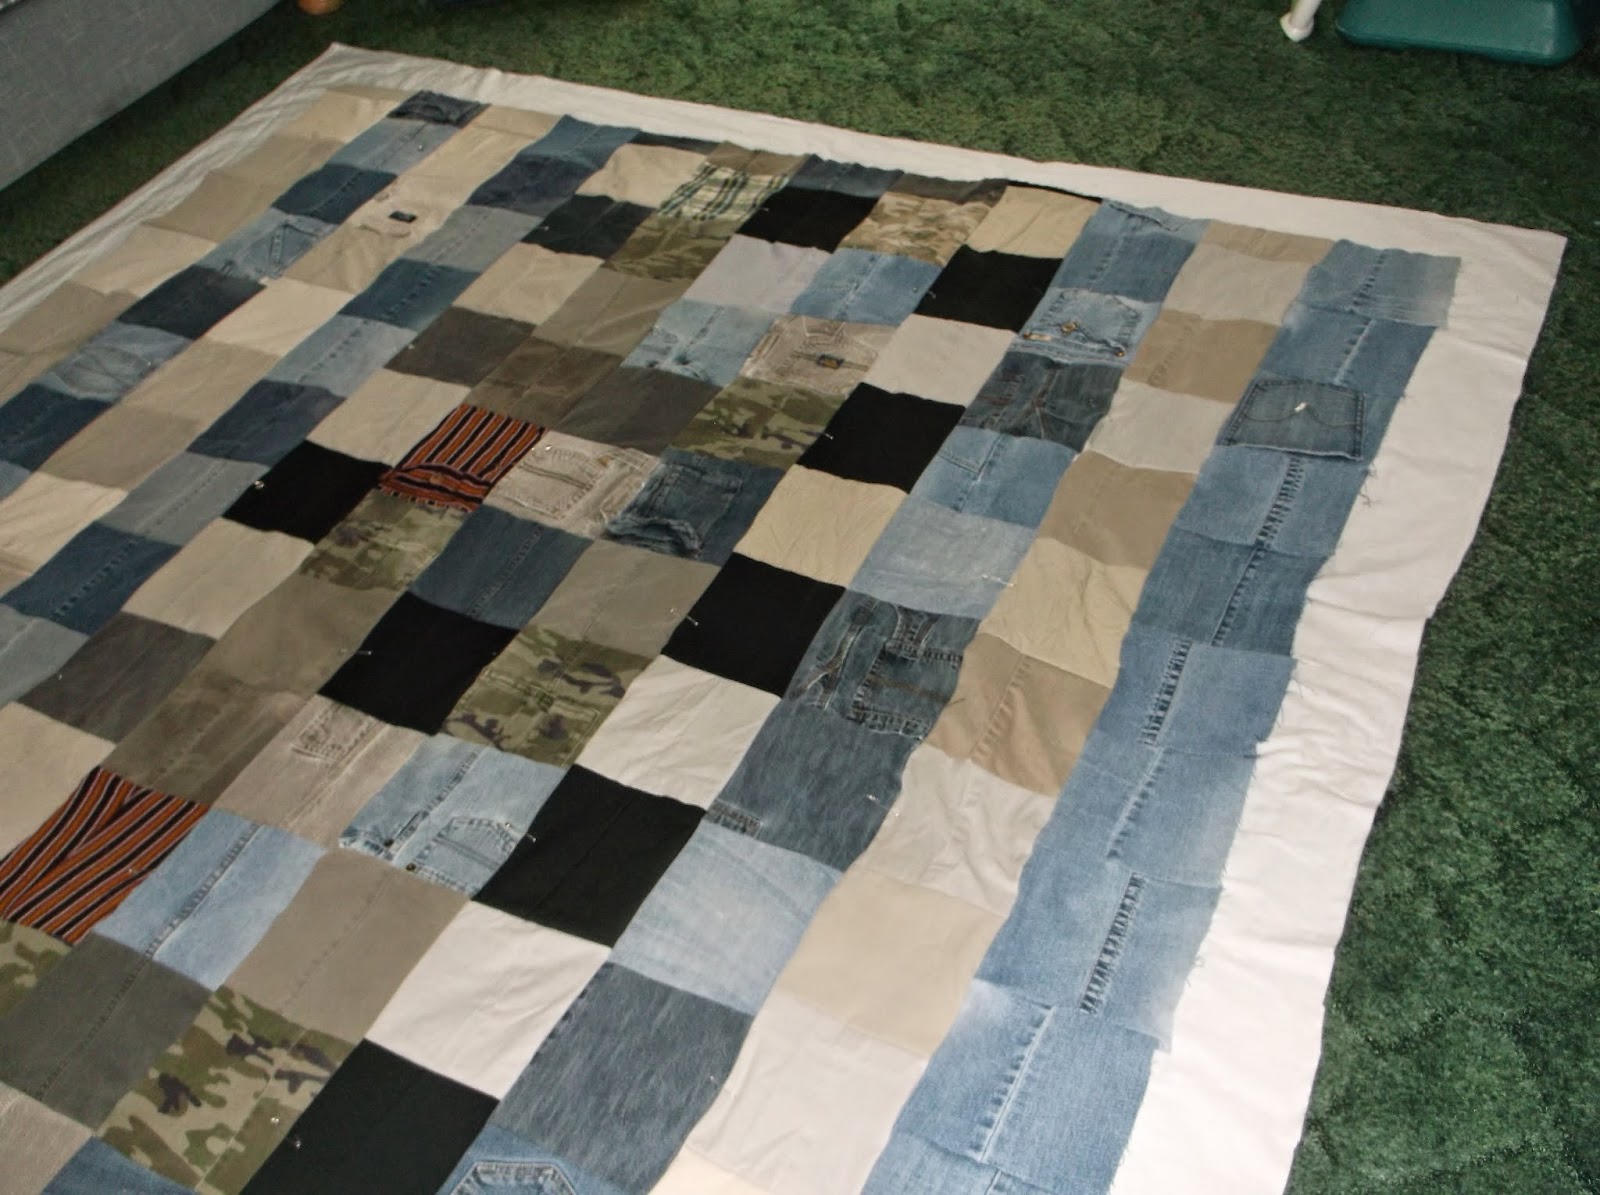 James & Sacha: How to Make a Jean Quilt (My Way)